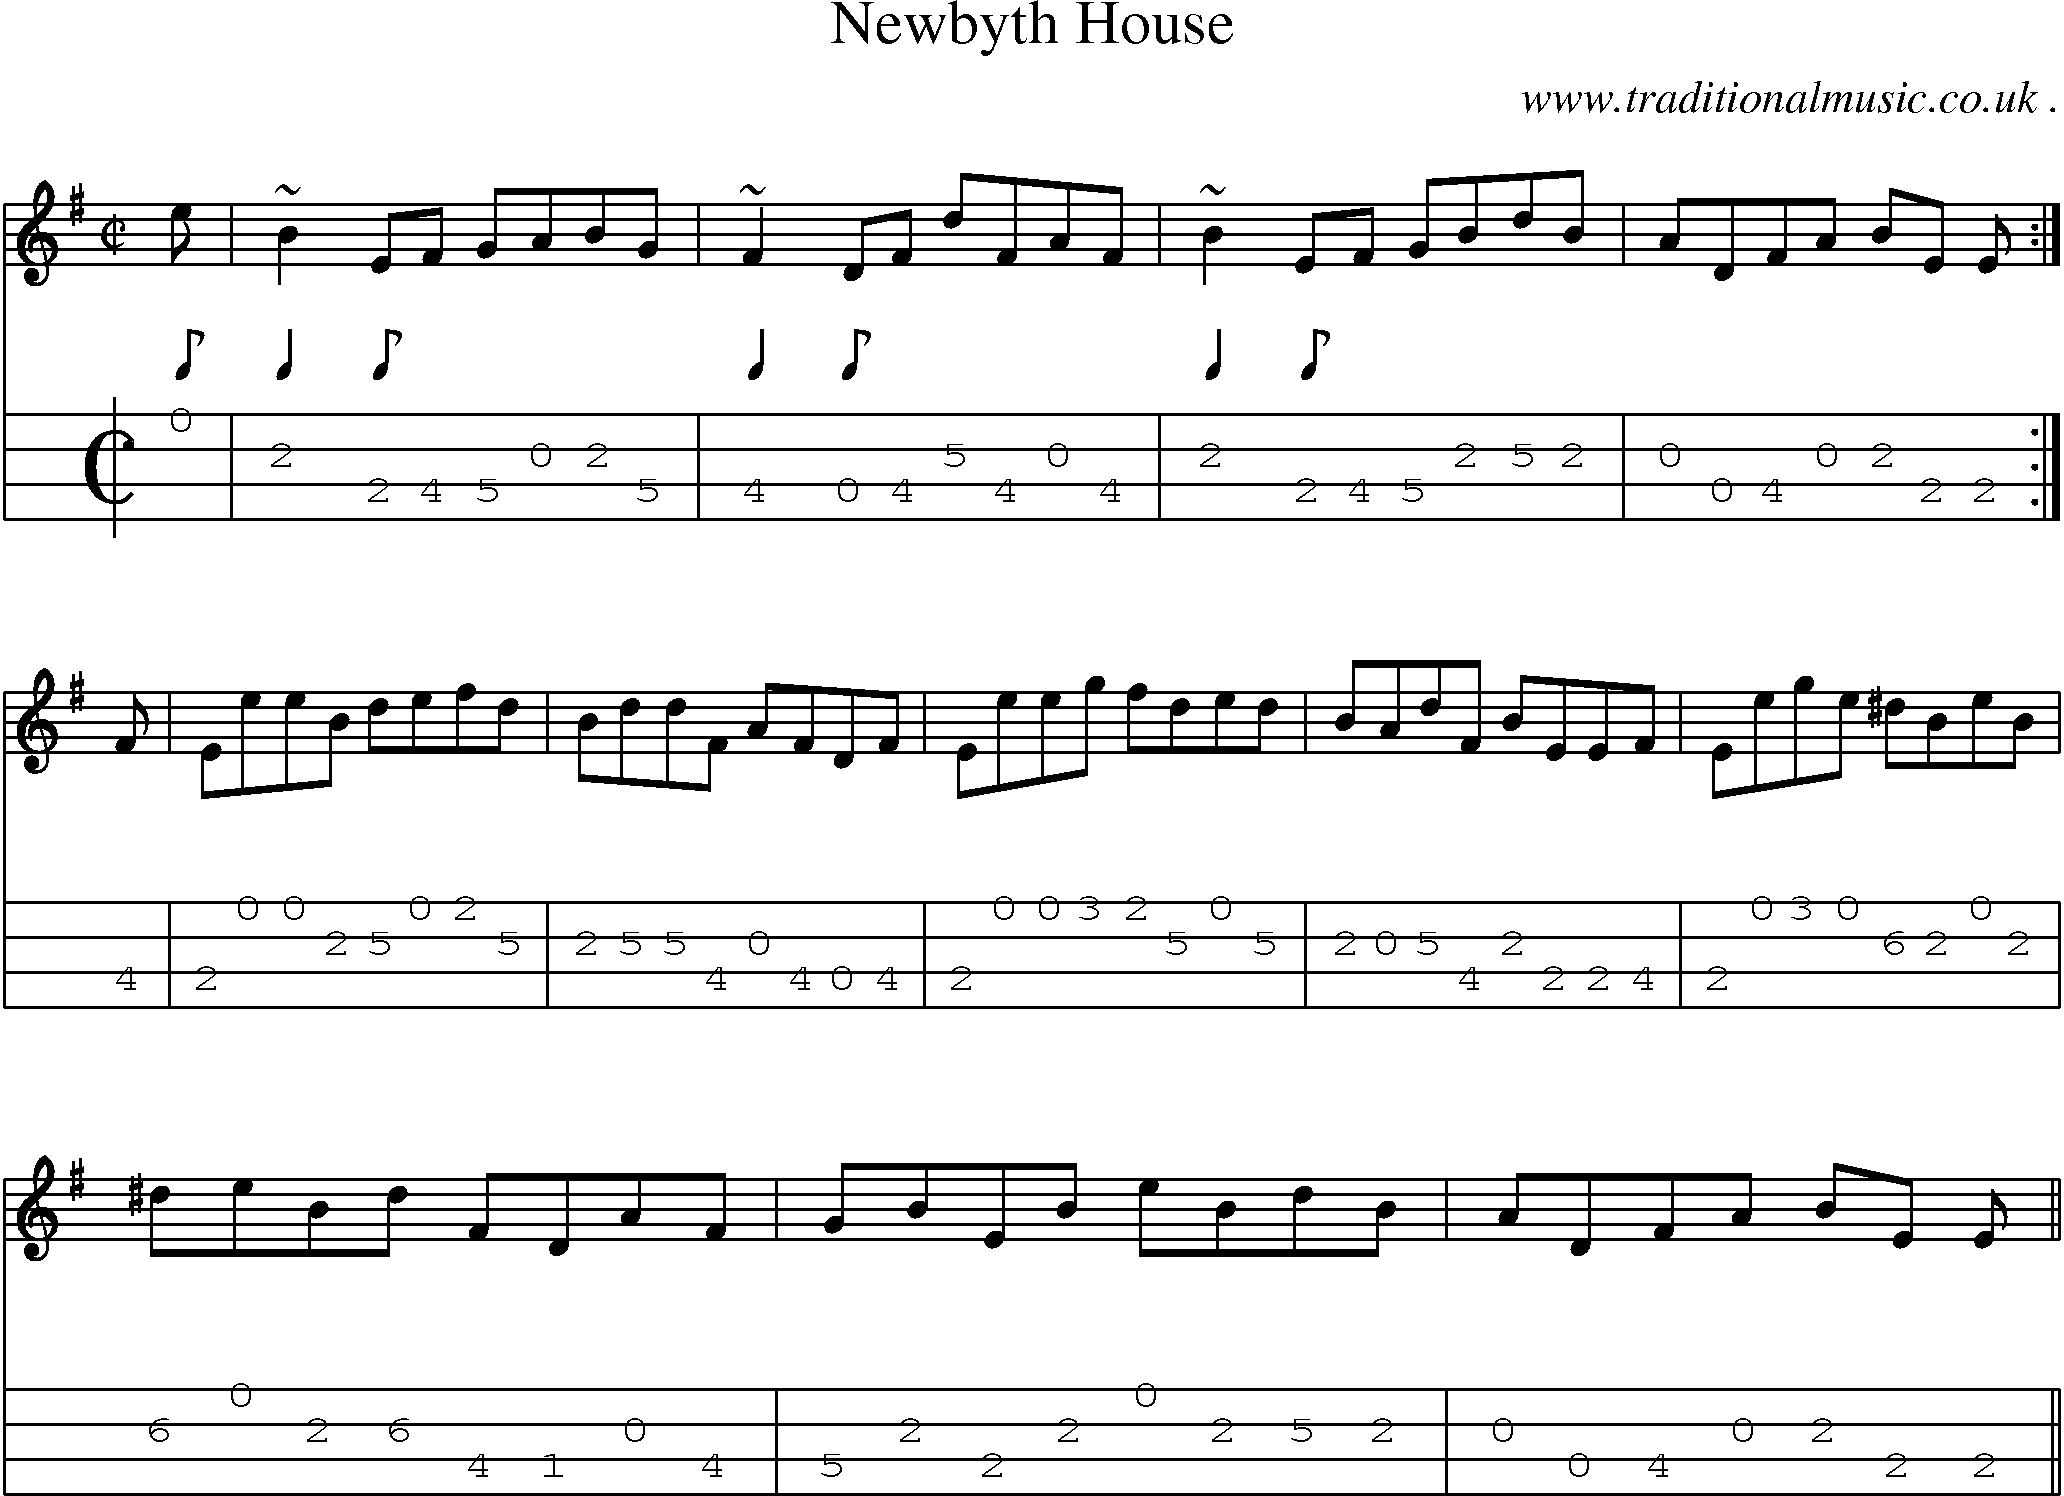 Sheet-music  score, Chords and Mandolin Tabs for Newbyth House